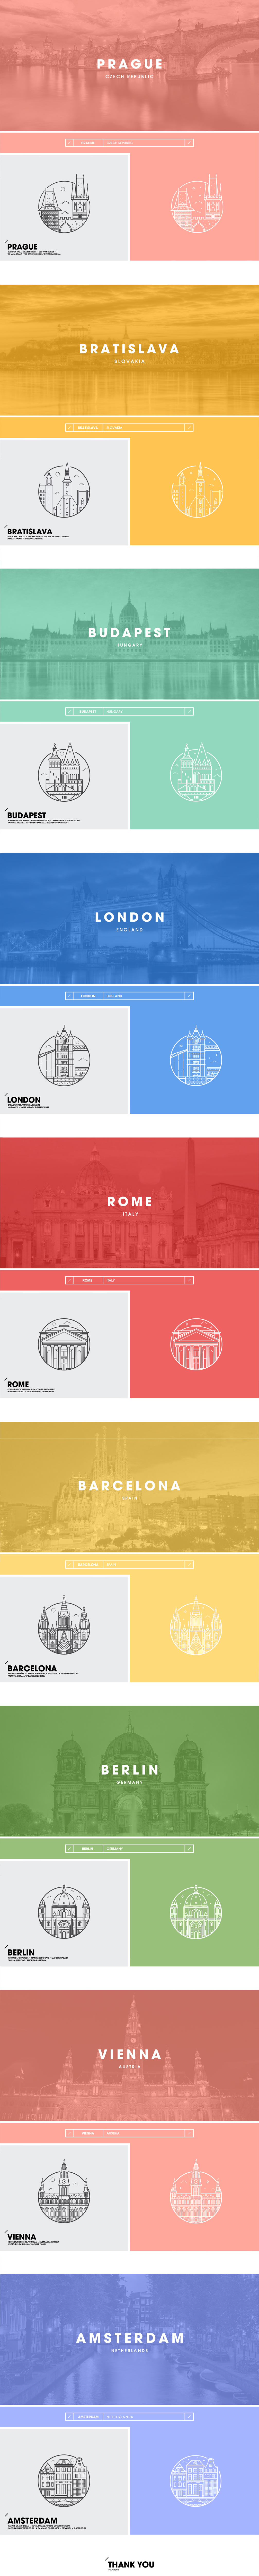 Icondesign icons Landmarks country CapitalCities Minimalism lineart